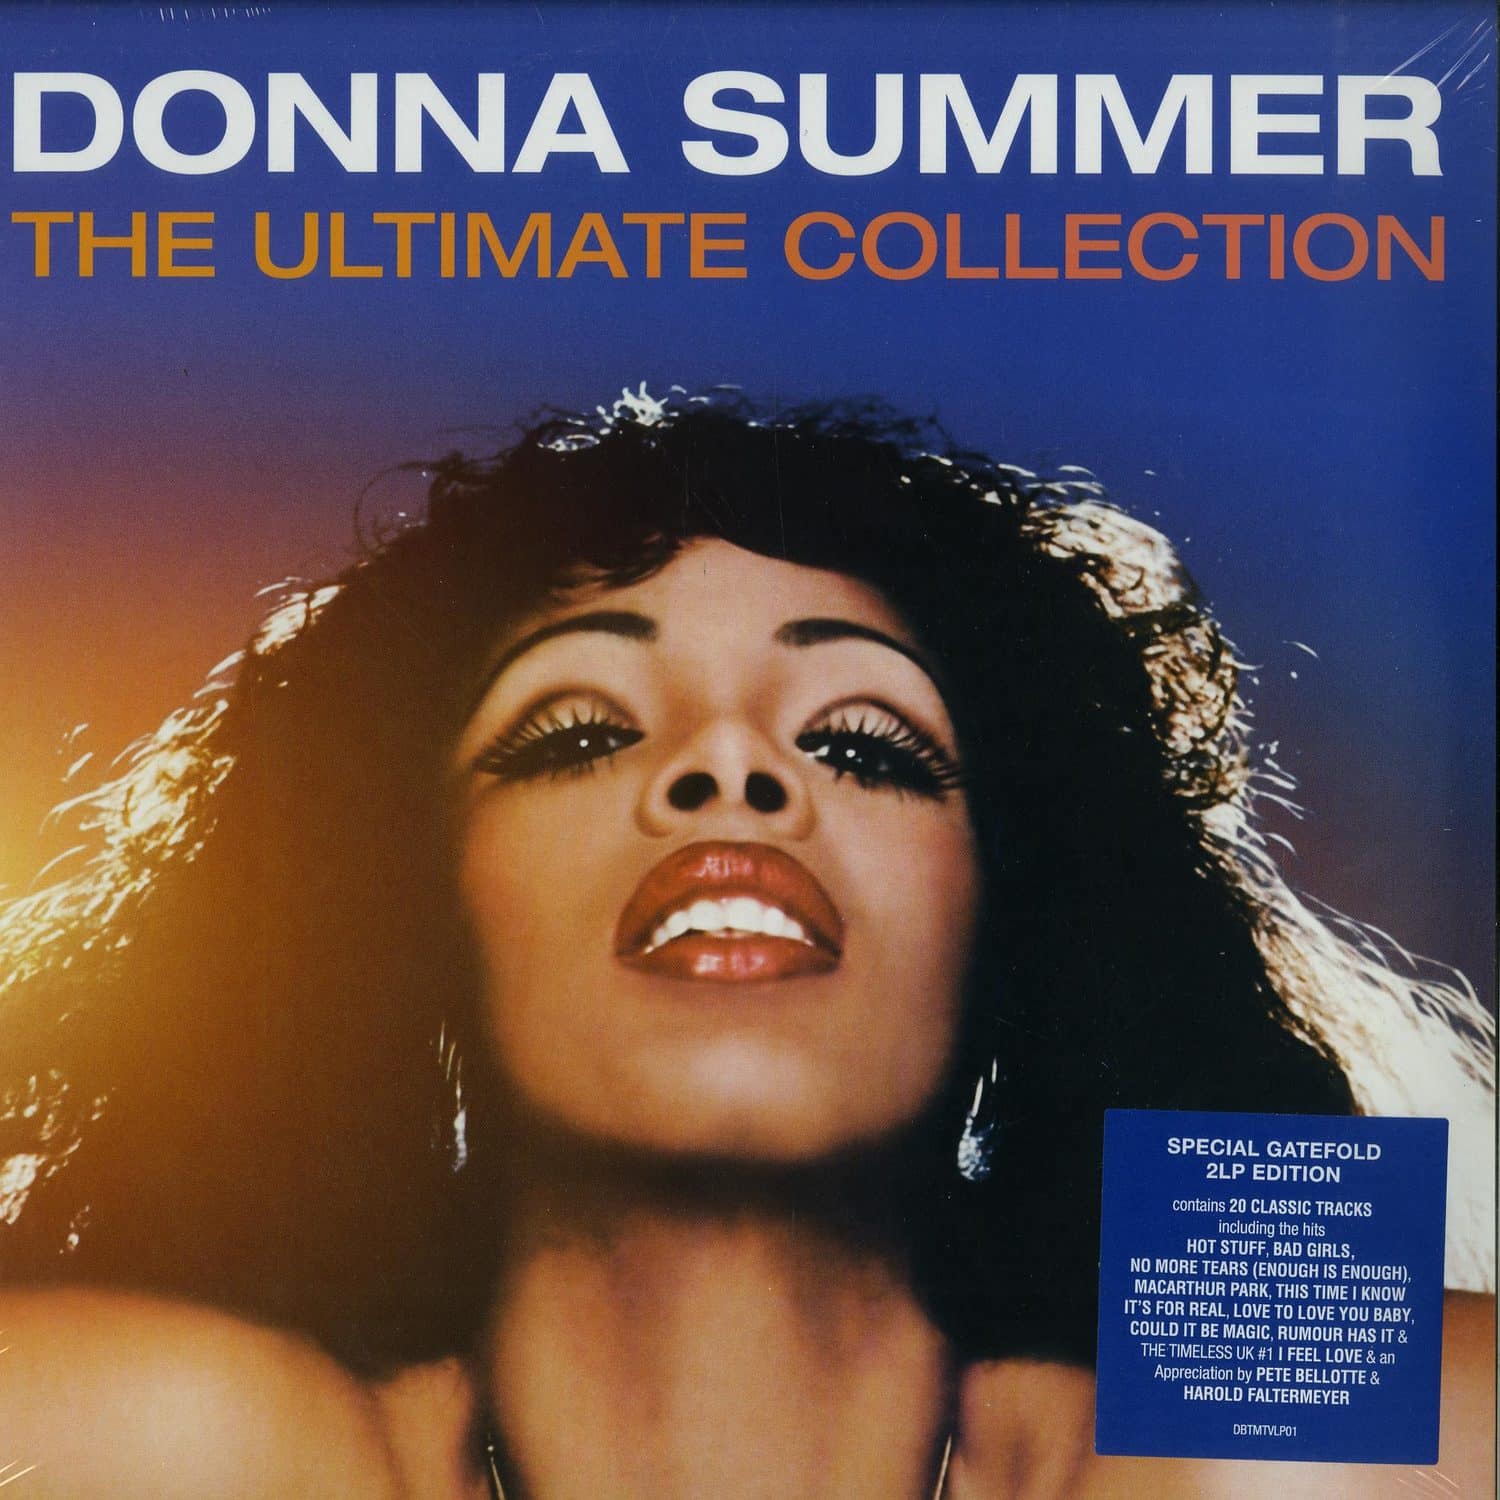 Donna Summer - THE ULTIMATE COLLECTION 